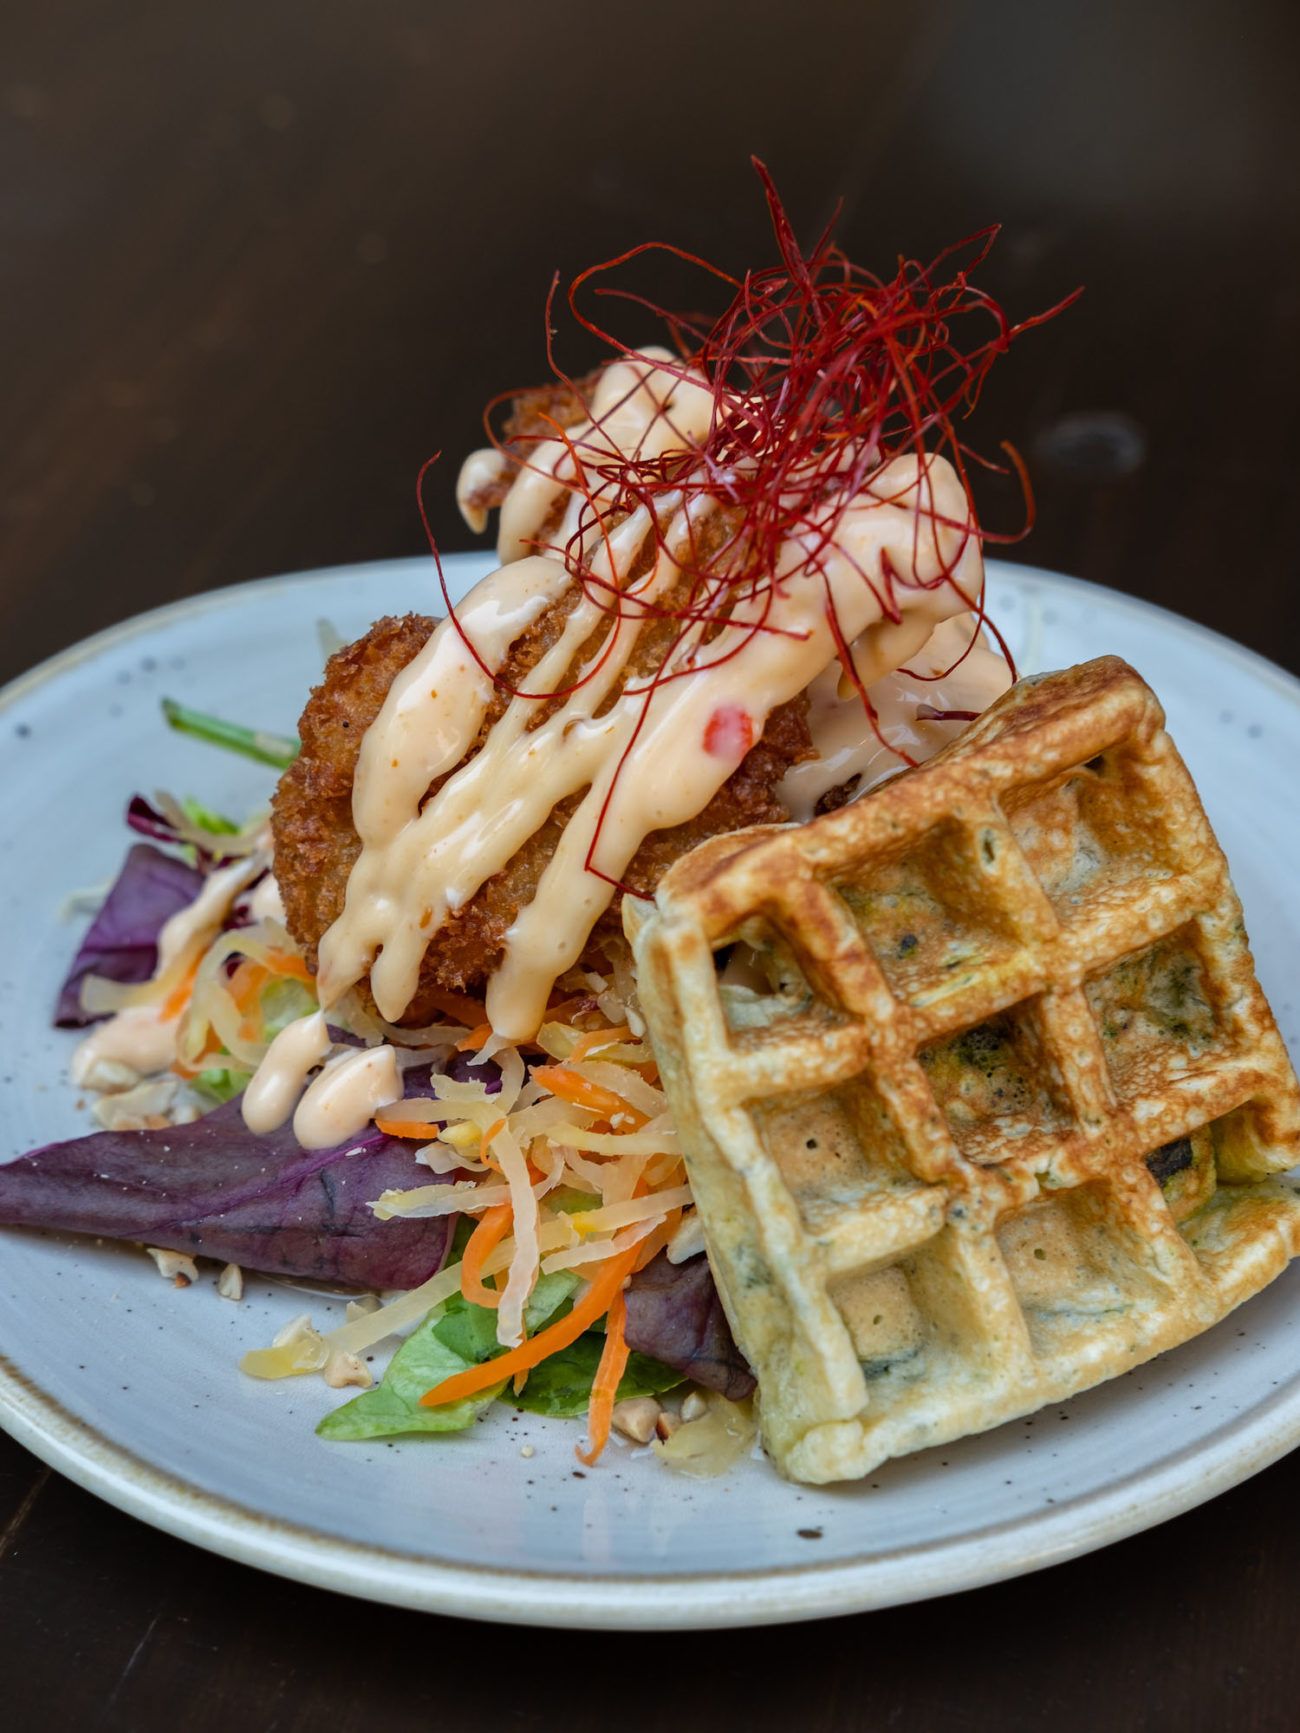 Foodblog Chicken and Waffles asia style